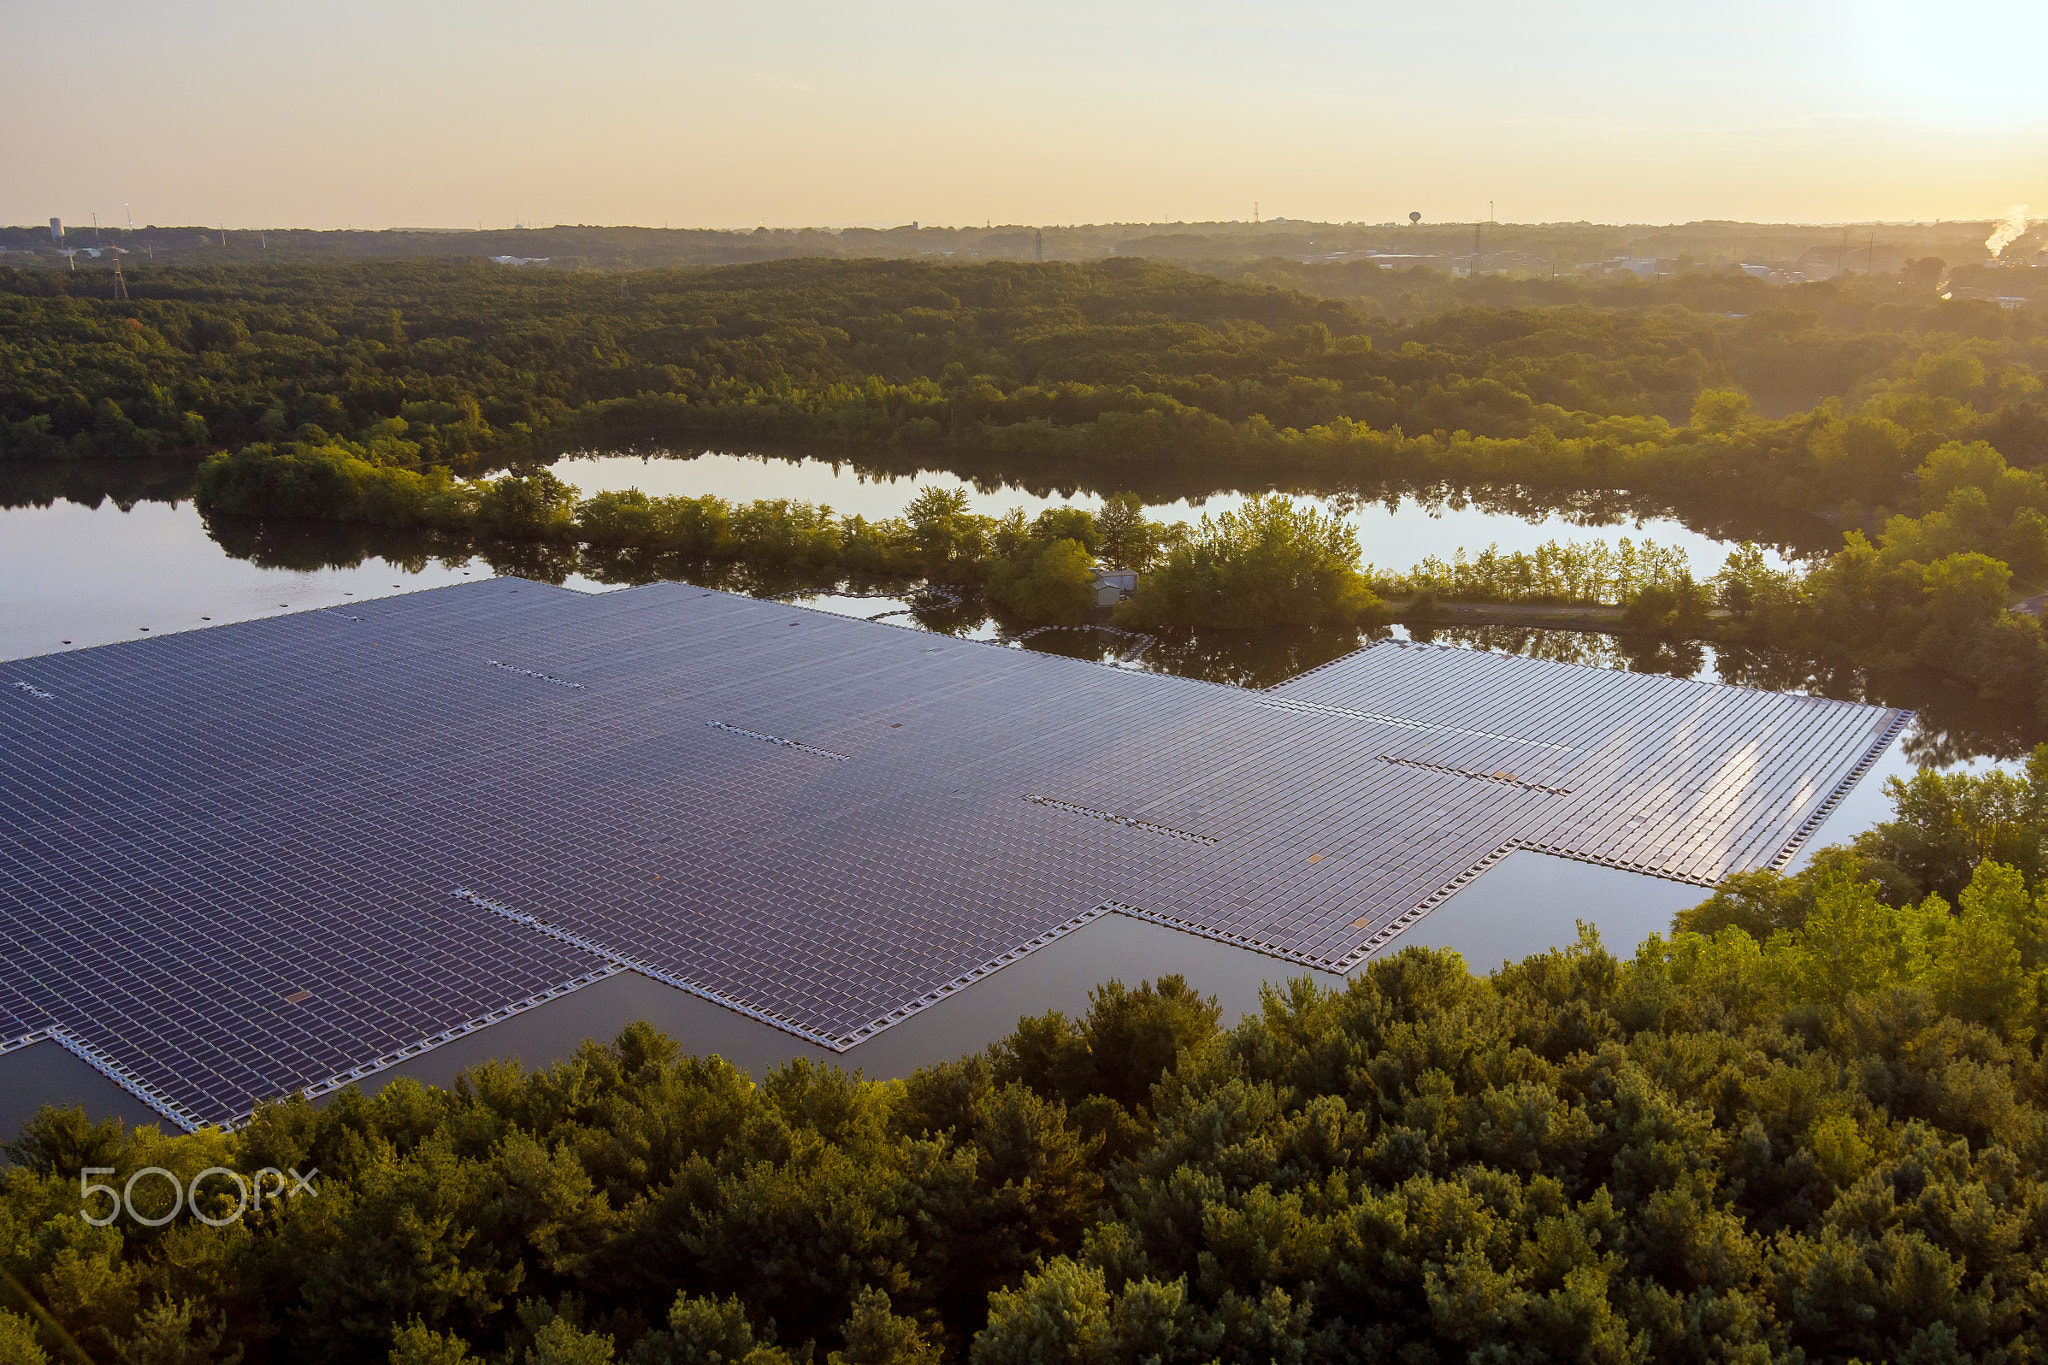 Aerial view of floating solar panels platform system on the lake